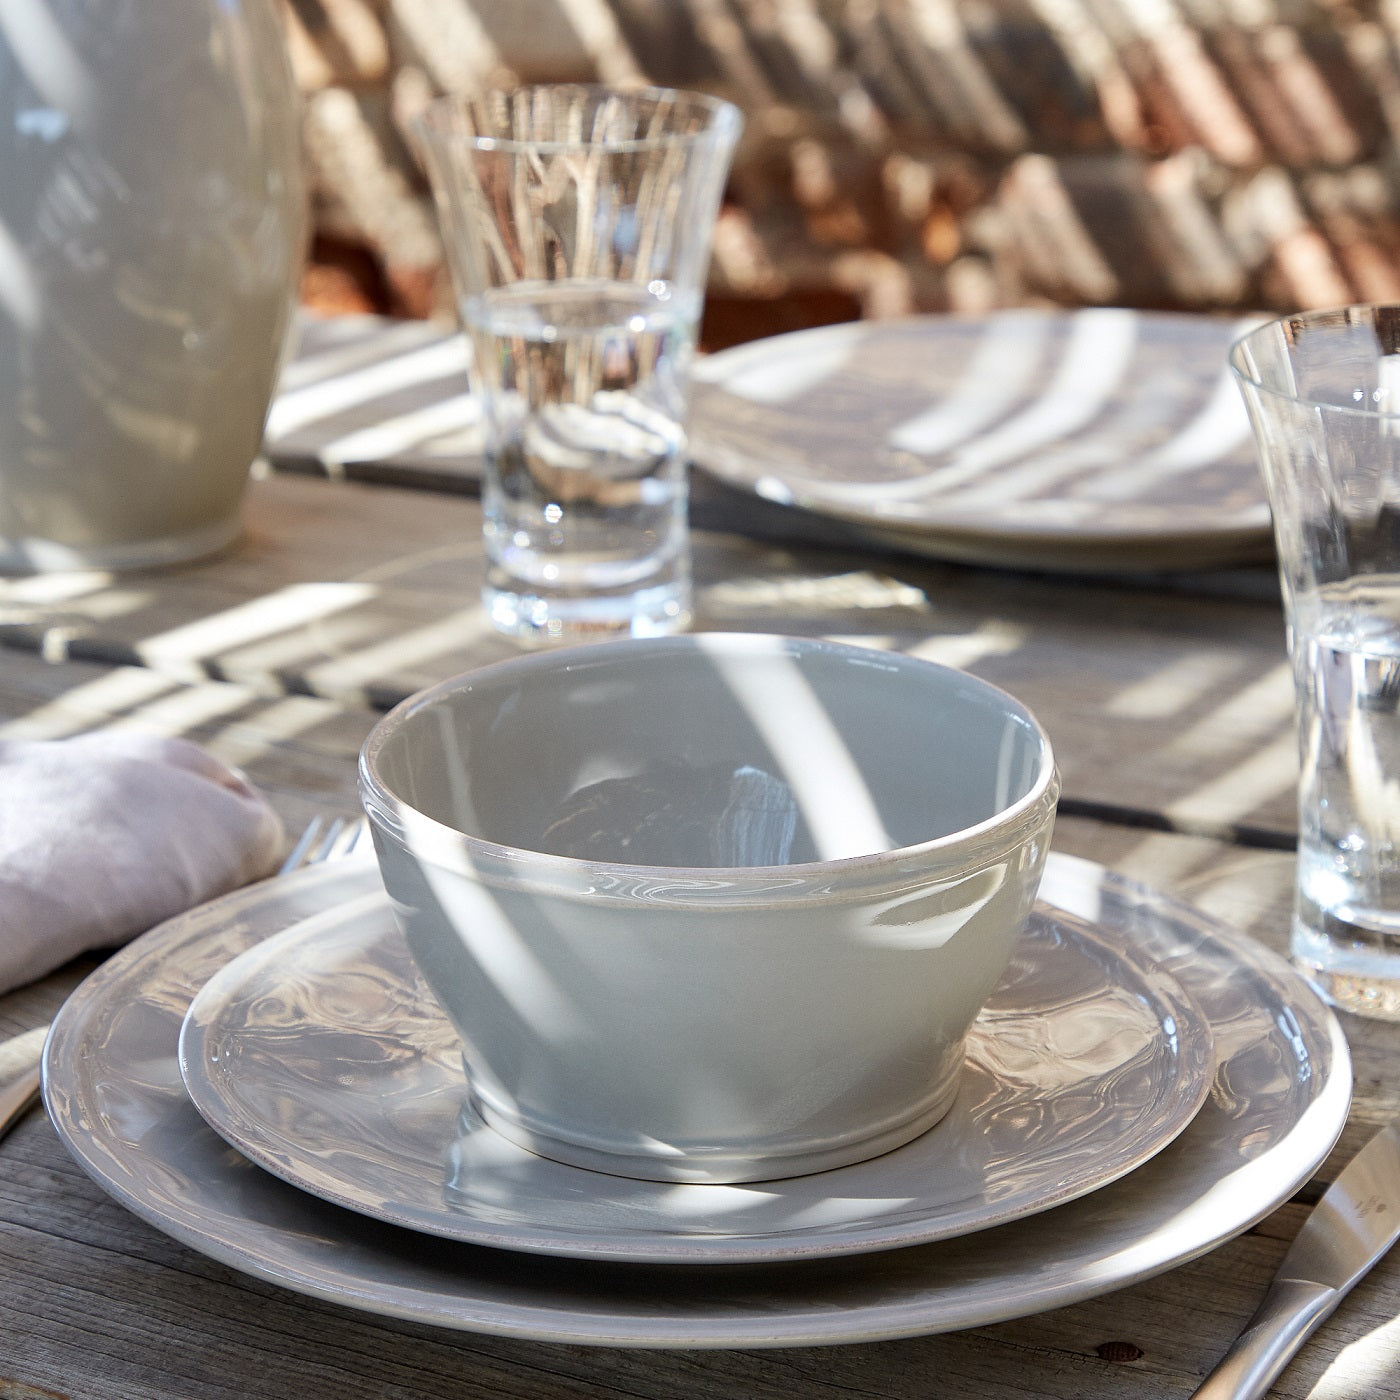 Stack of pearly white dinnerware on outdoor dining table with dinner plate, side plate and cereal bowl.